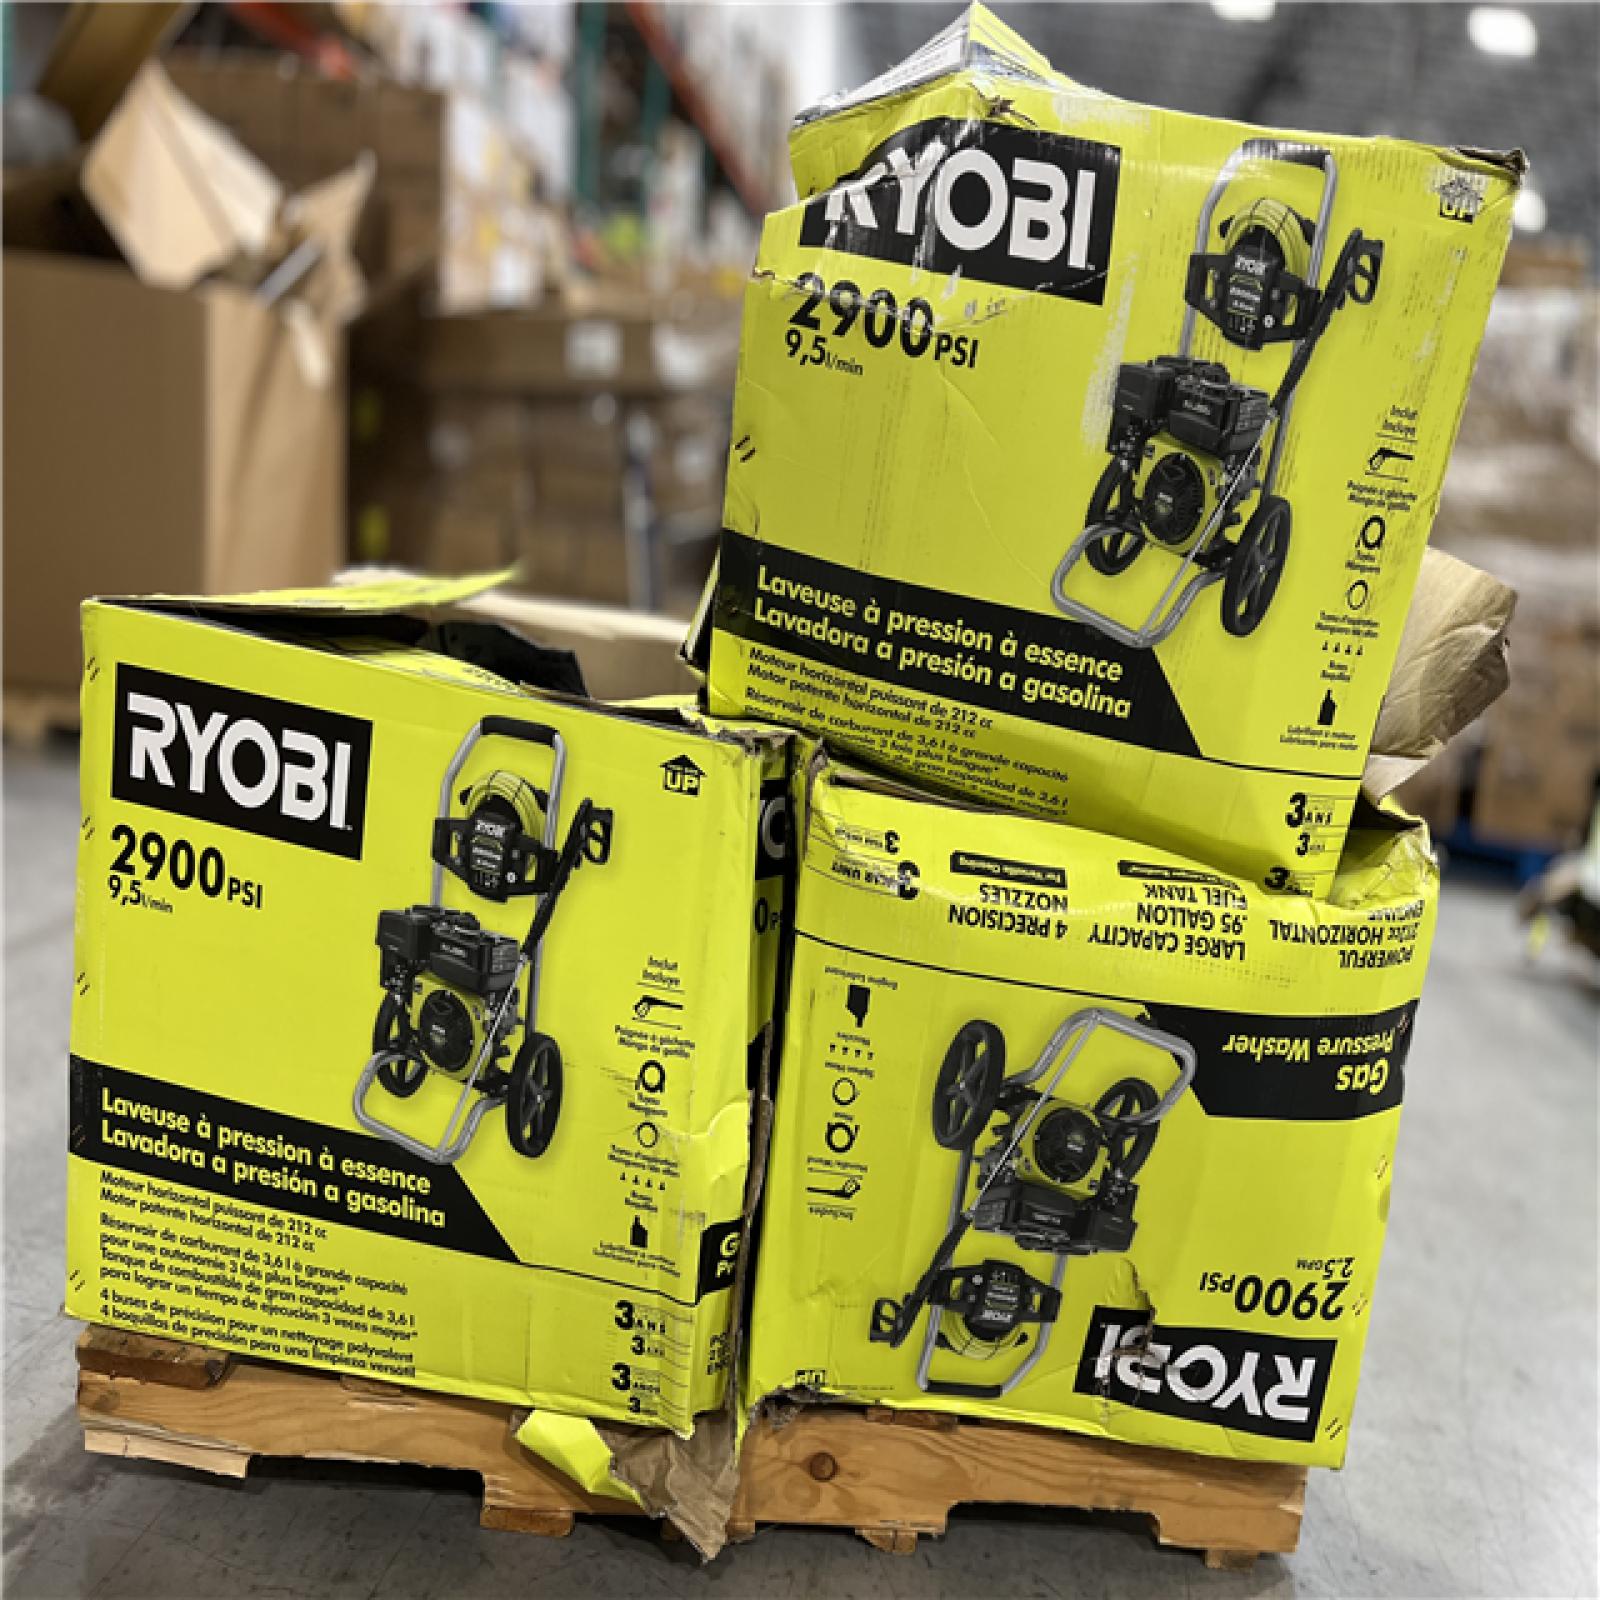 DALLAS LOCATION - RYOBI 2900 PSI 2.5 GPM Cold Water Gas Pressure Washer with 212cc Engine PALLET - (5 UNITS)